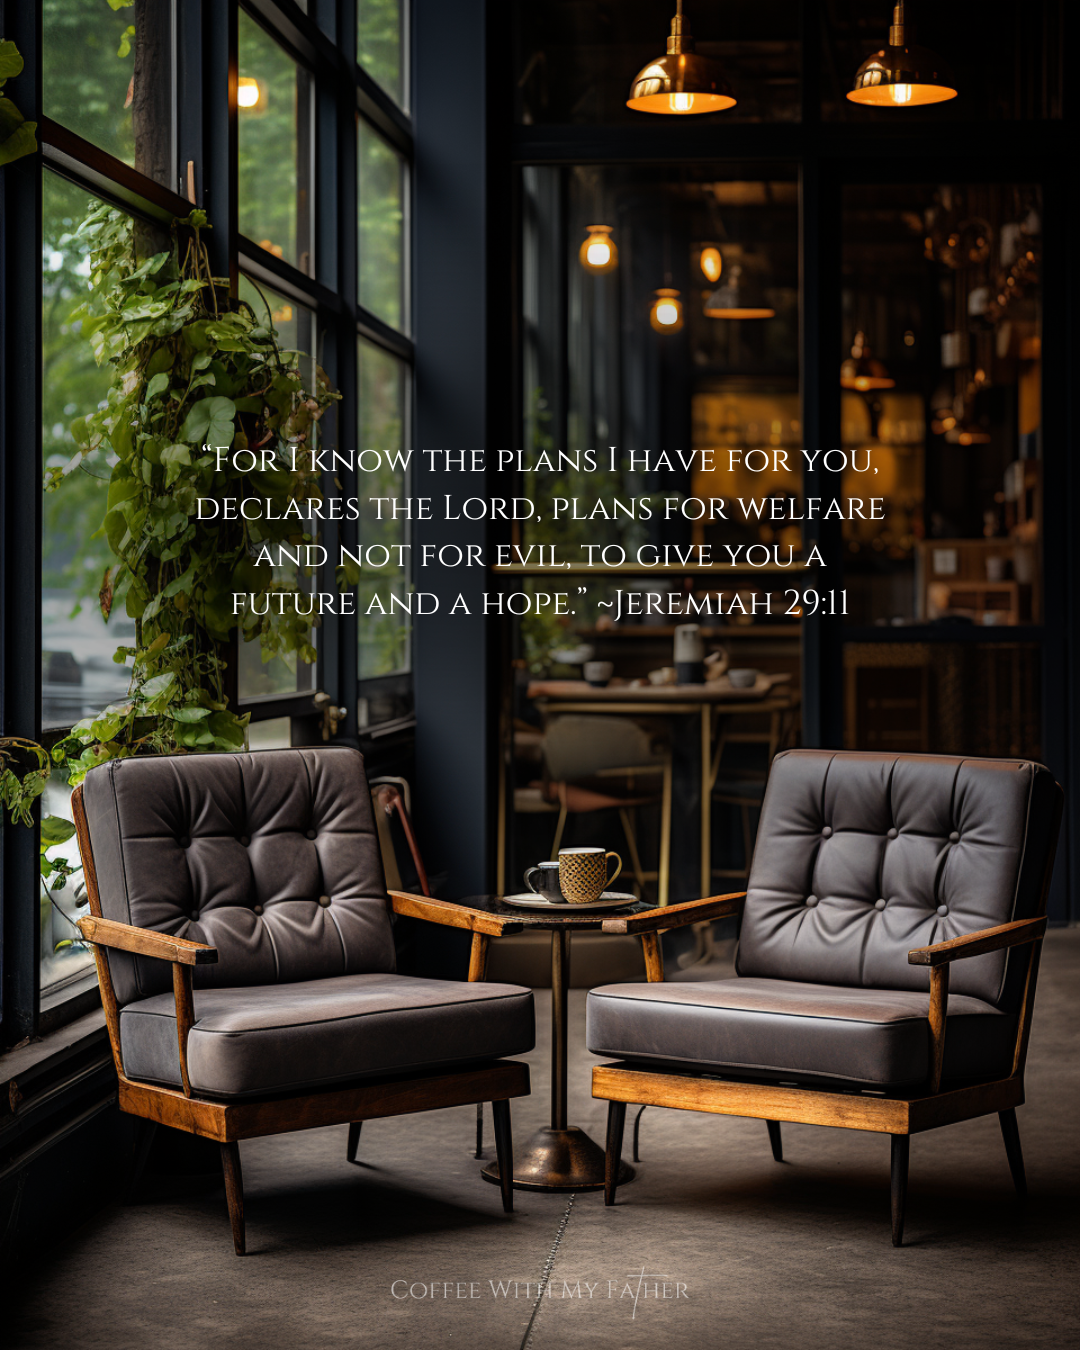 Cozy café corner with two leather armchairs and a small wooden table, a steaming cup of coffee, surrounded by large windows and hanging pendant lights, featuring a hopeful verse from Jeremiah 29:11